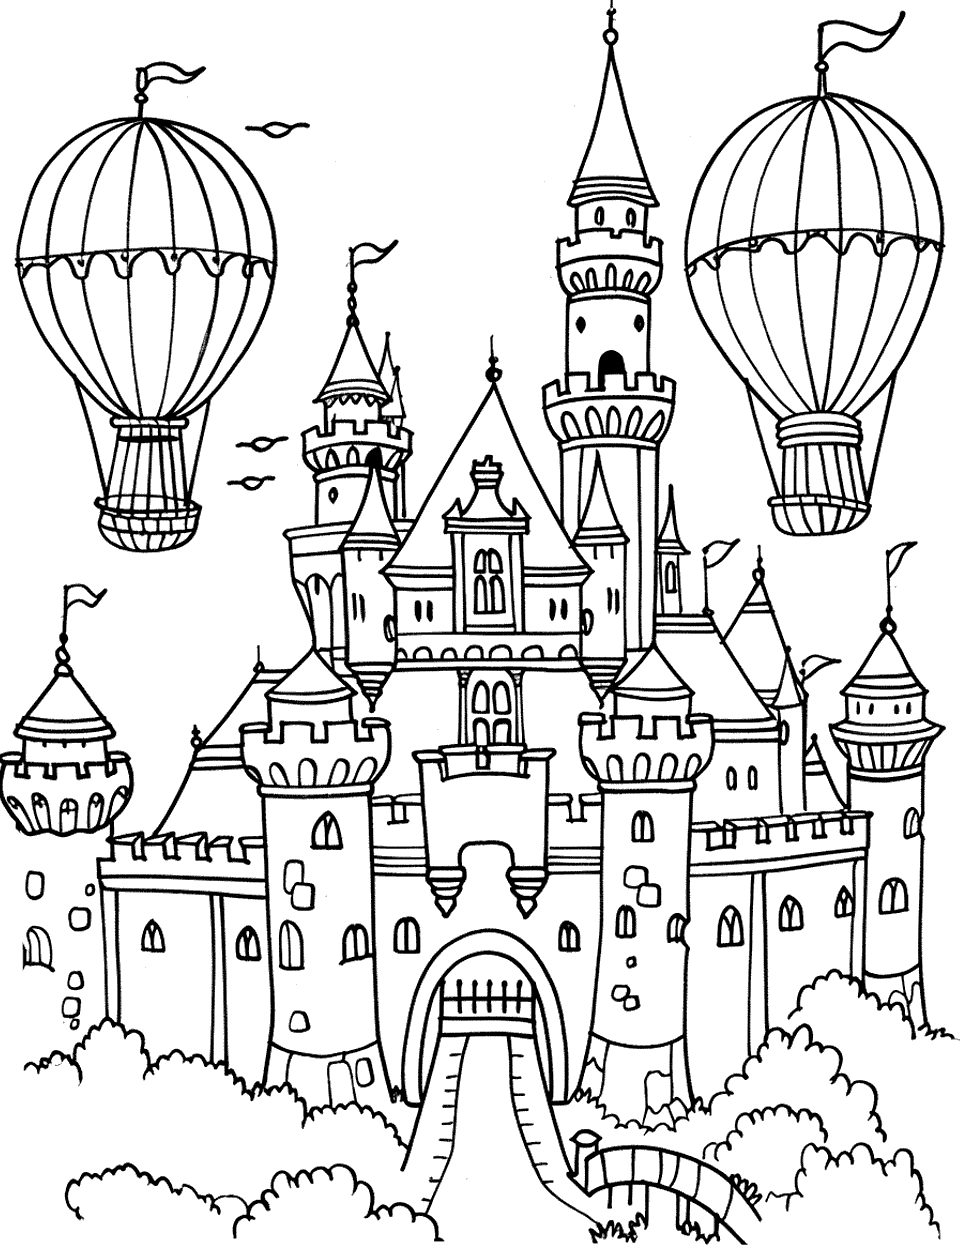 Castle and Hot Air Balloons Coloring Page - Hot air balloons floating near a majestic castle.